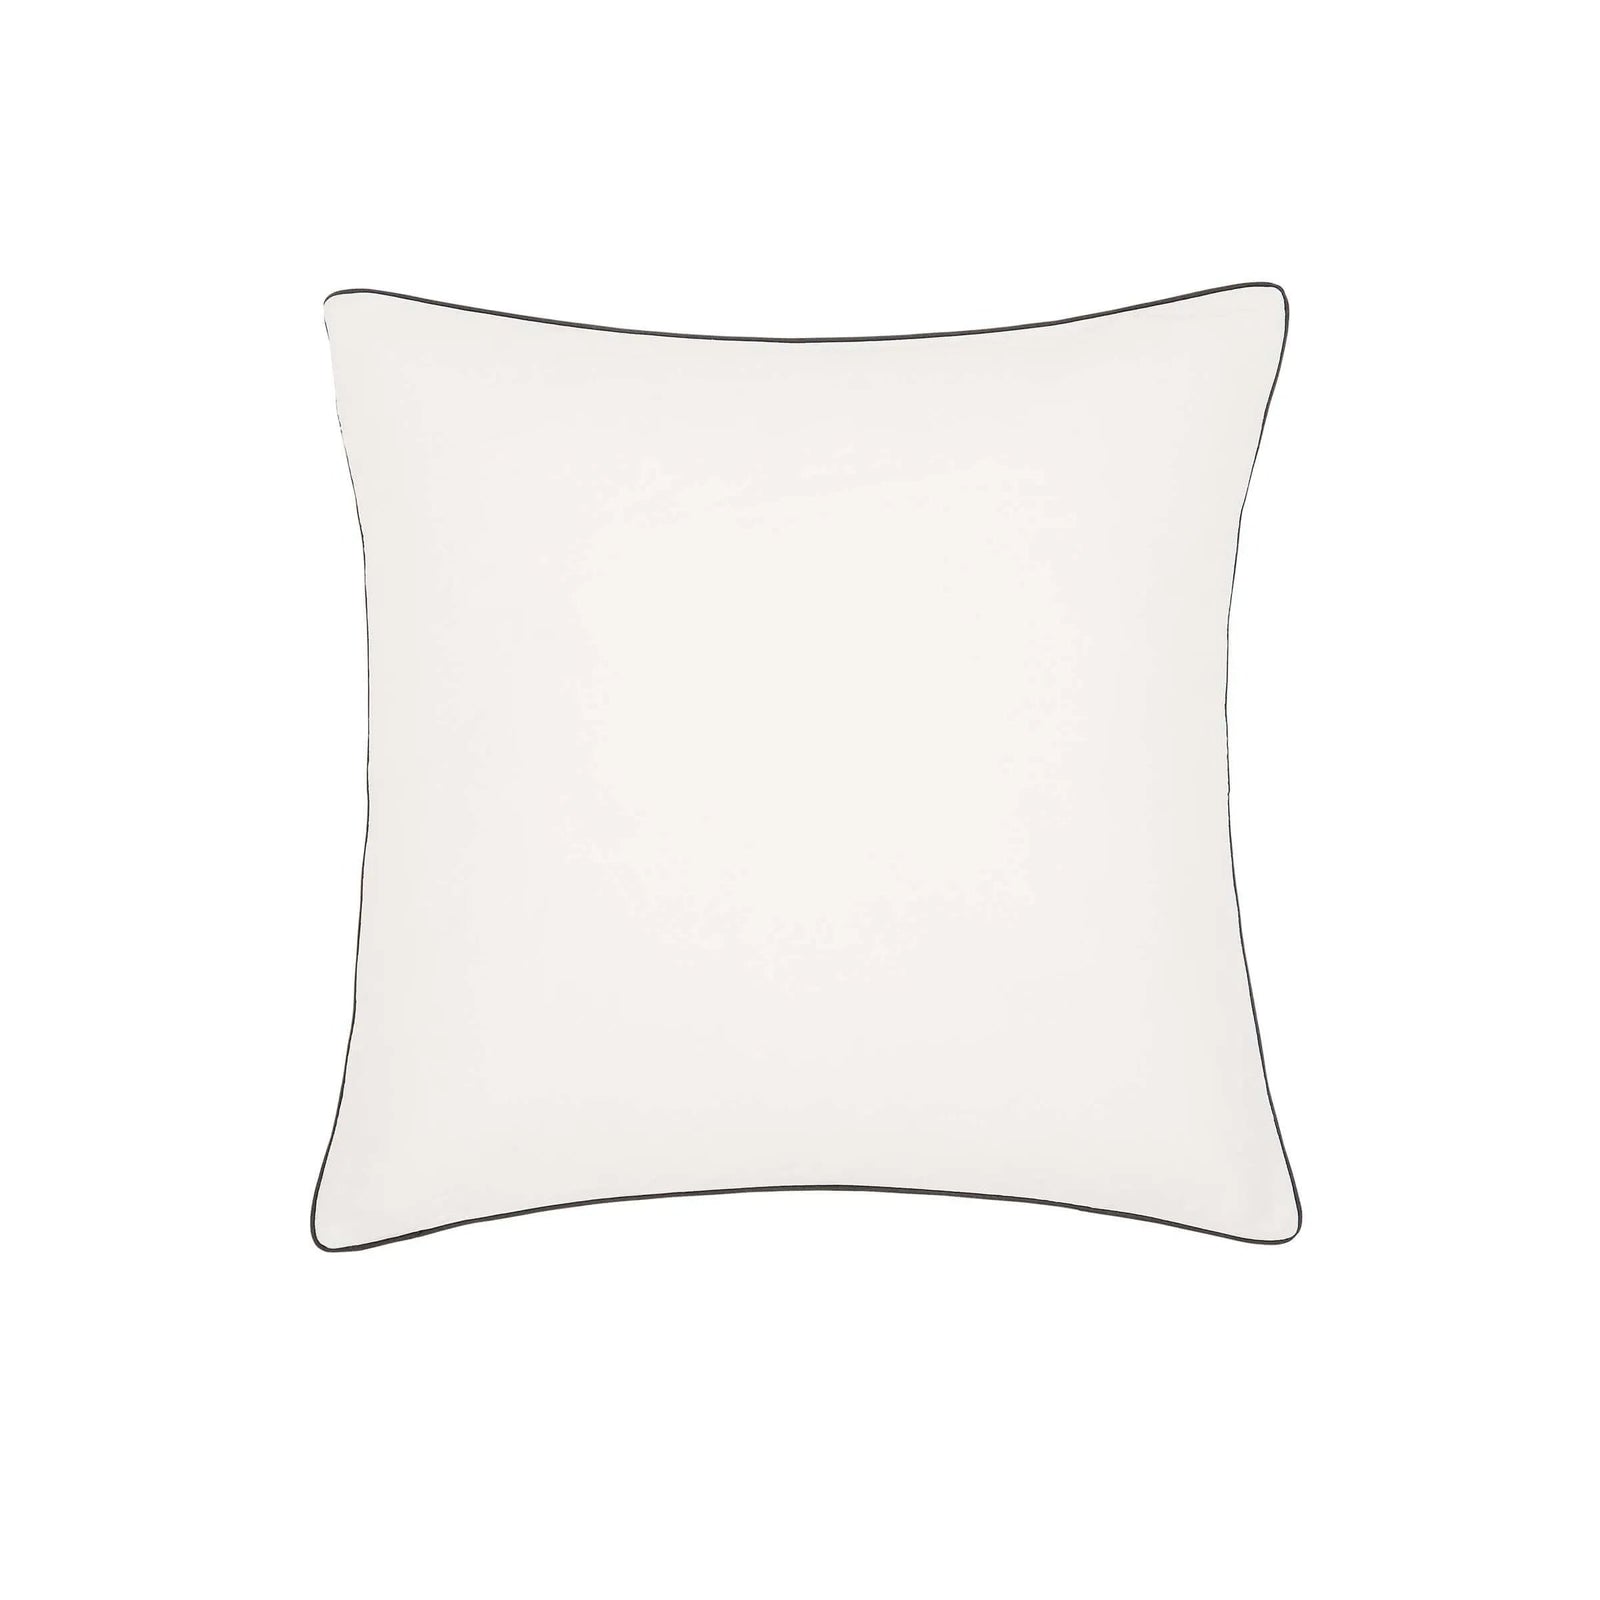 Harlequin Sumi Square Pillowcase in Pearl & Charcoal